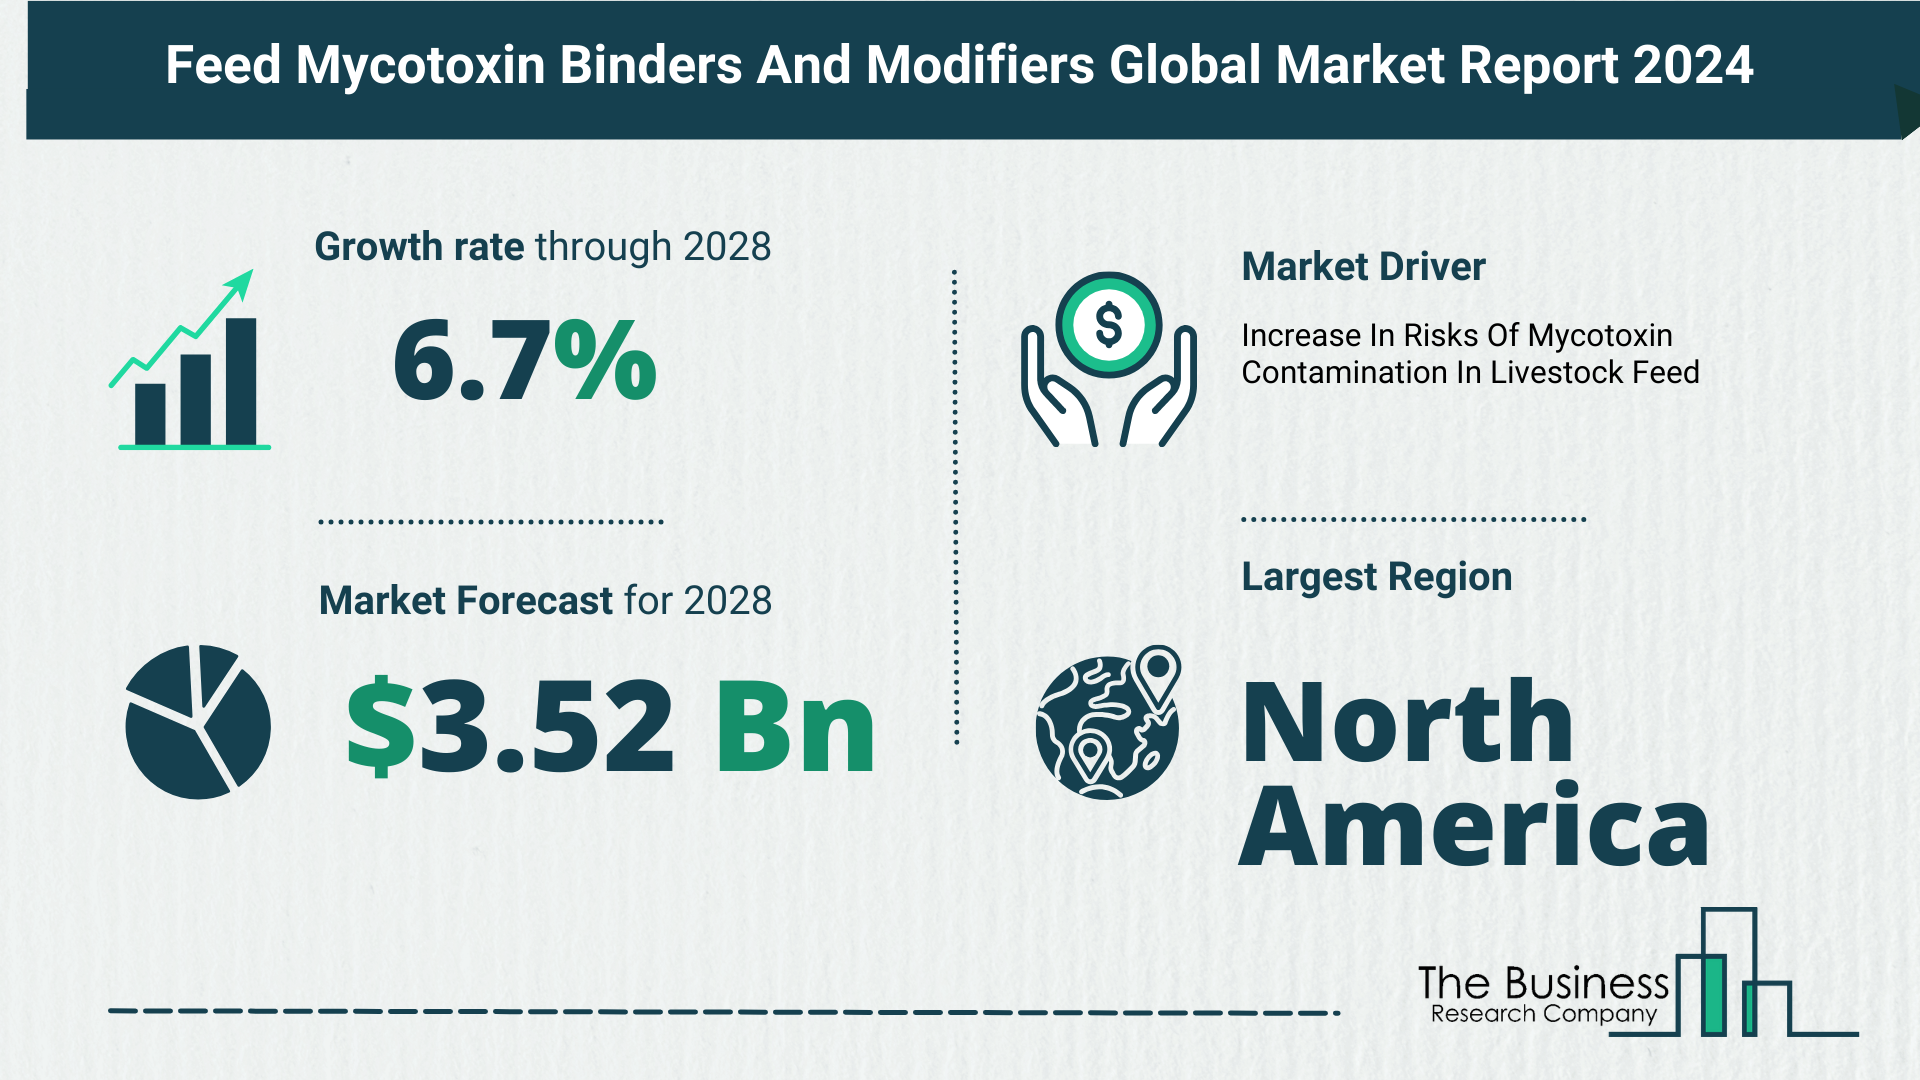 What Is The Forecast Growth Rate For The Feed Mycotoxin Binders And Modifiers Market?